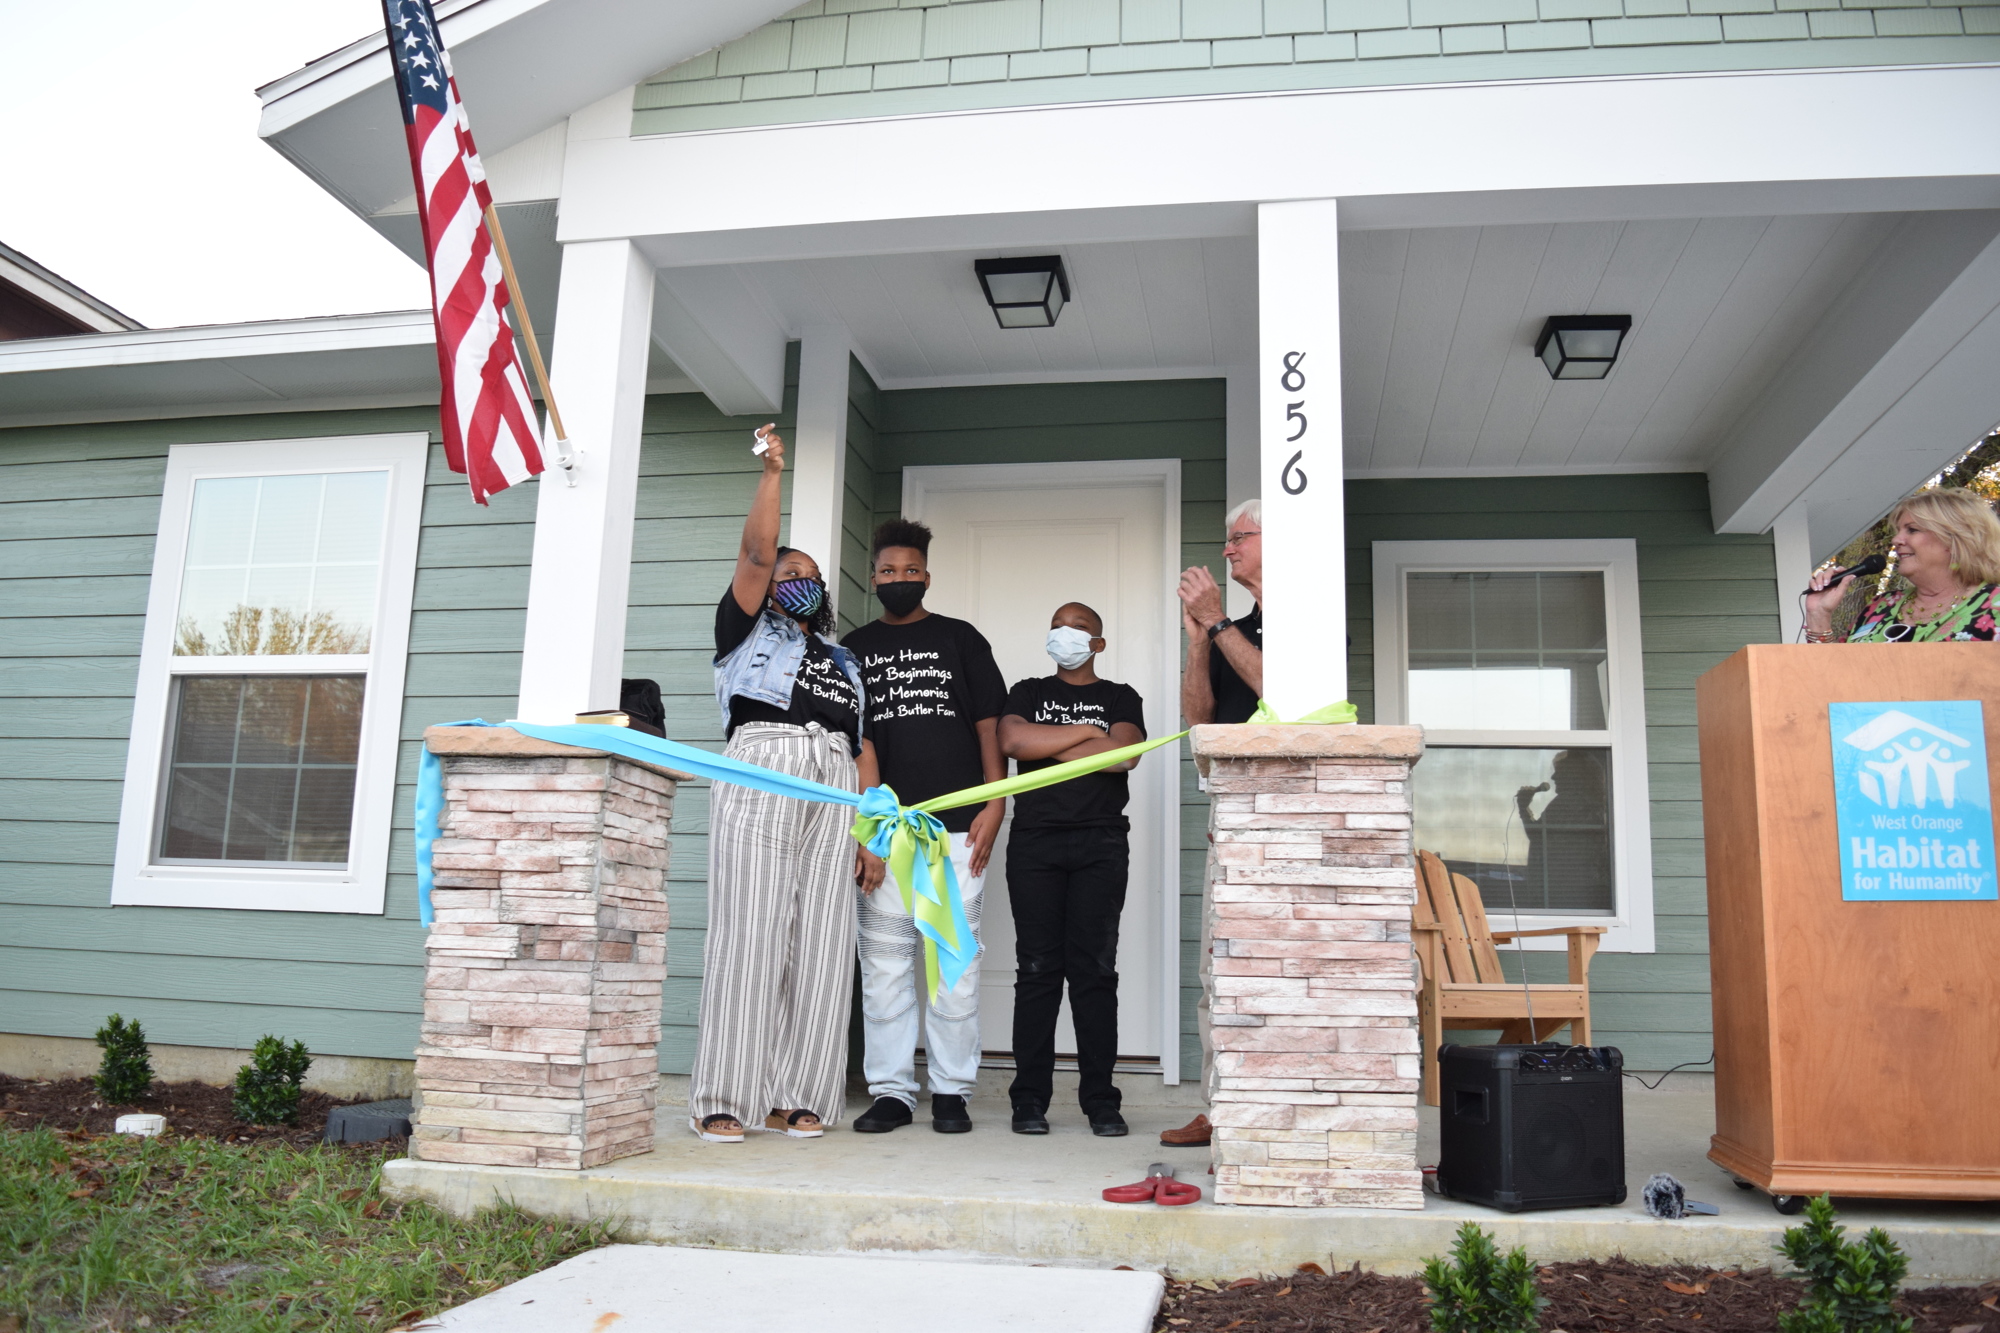 Antoinette Edwards excitedly held up the keys to her family's new home.